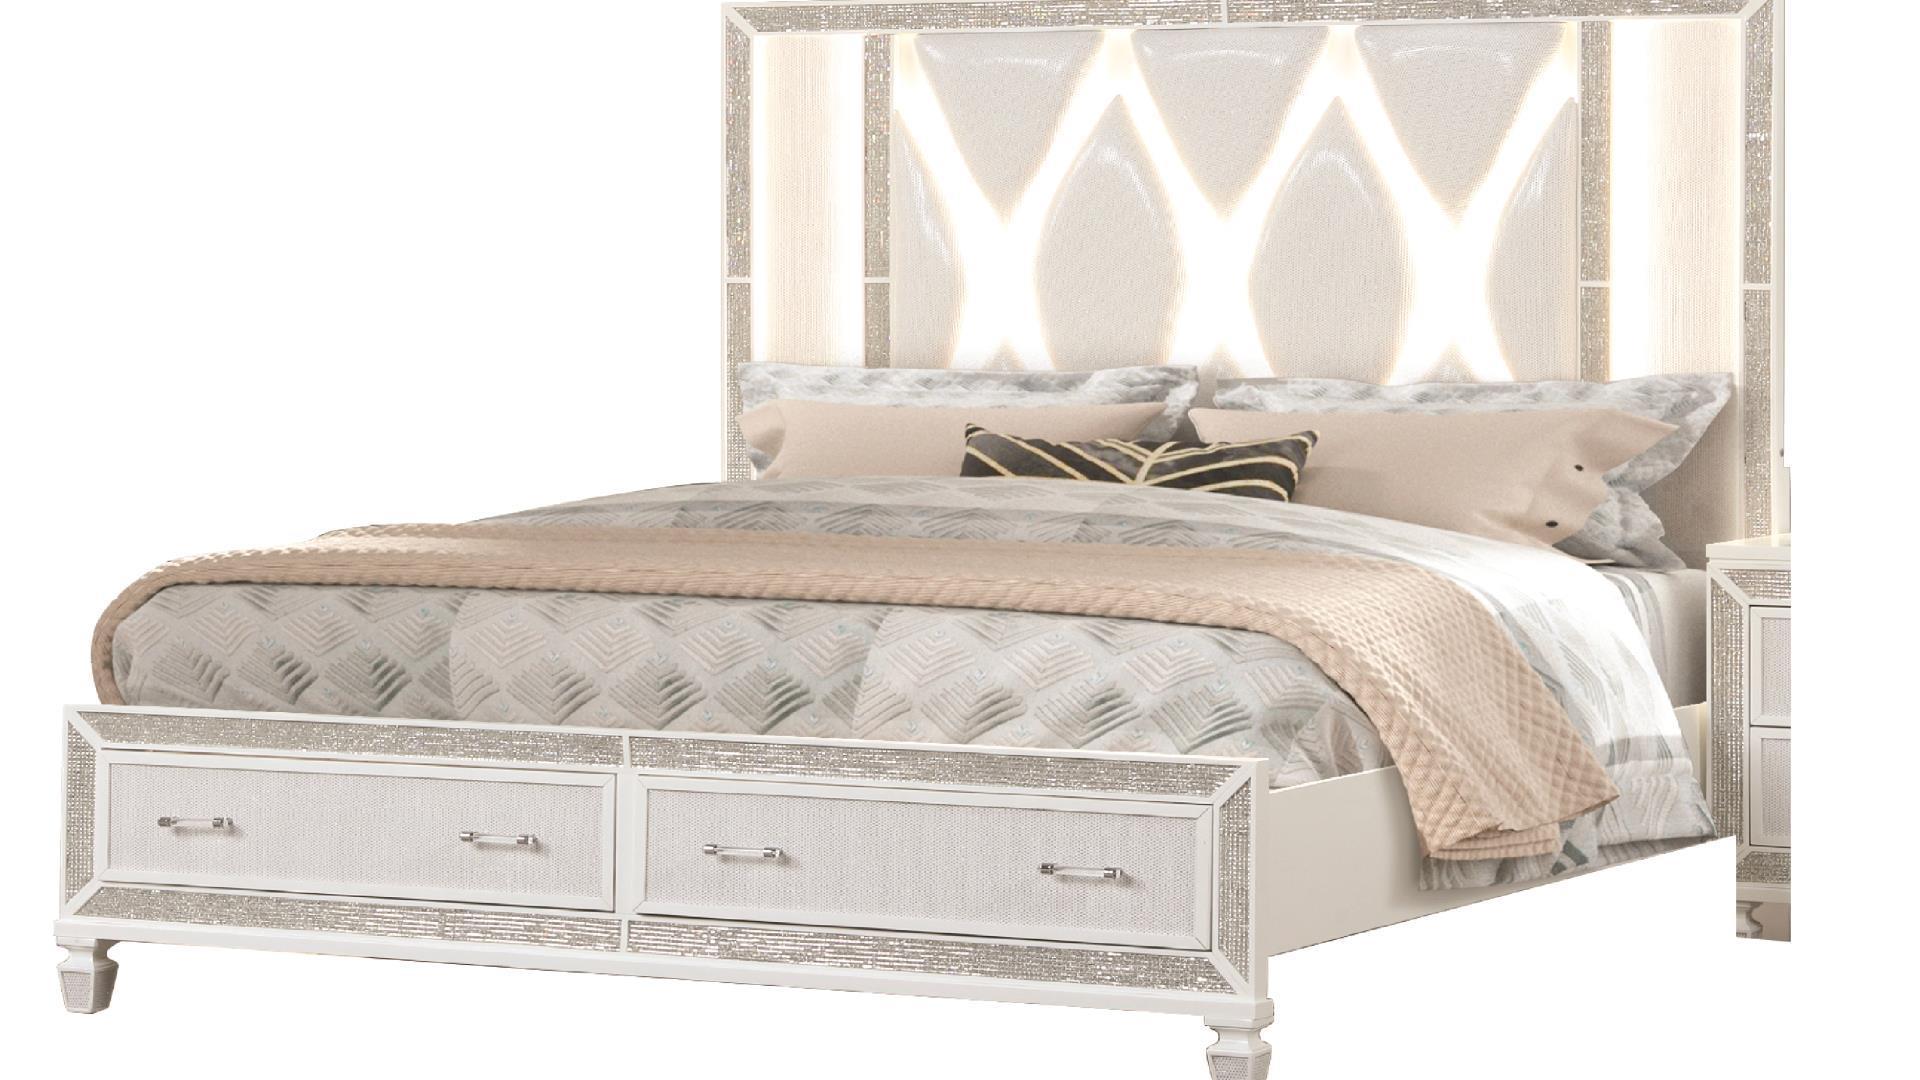 

    
Glam White Solid Wood Queen Bed Set 5Pcs CRYSTAL Galaxy Home Modern Contemporary
